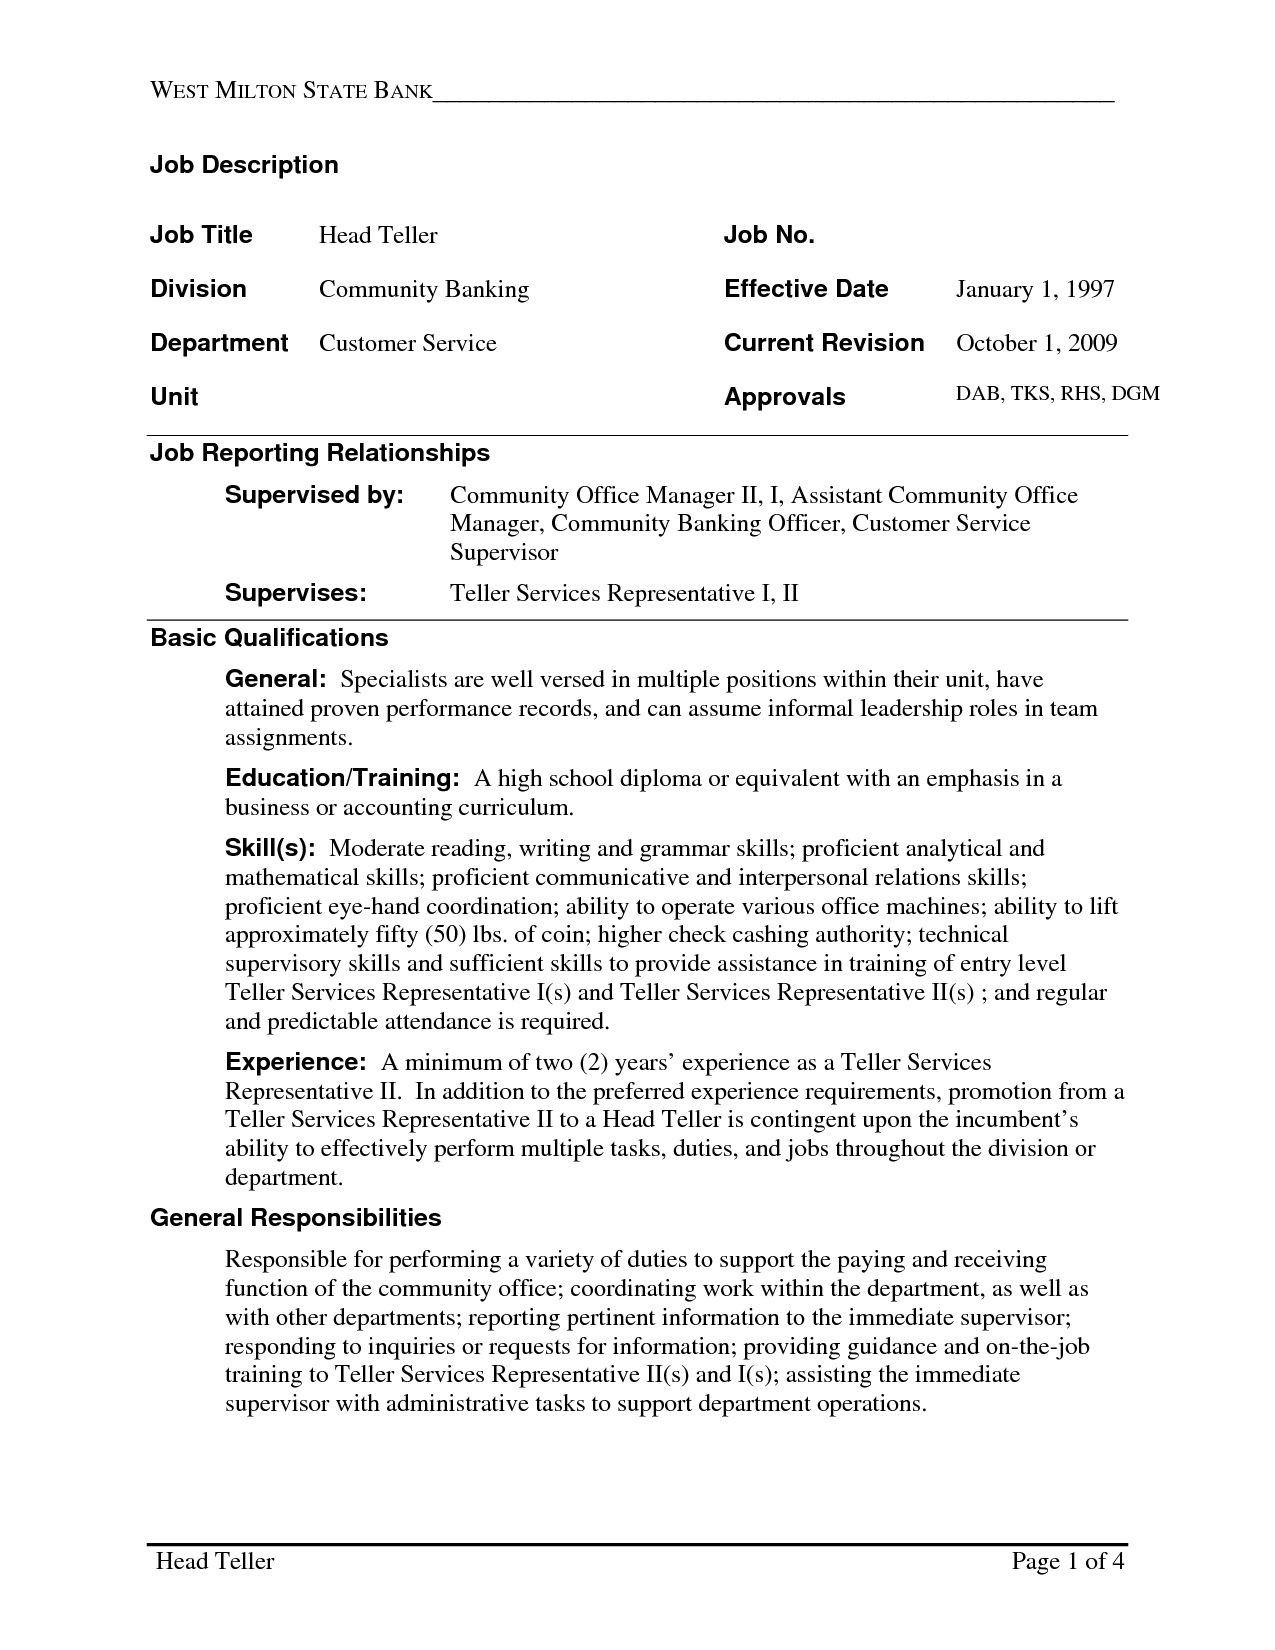 Resume Samples for Bank Teller Positions Bank Teller Resume with No Experience Latest Resume format